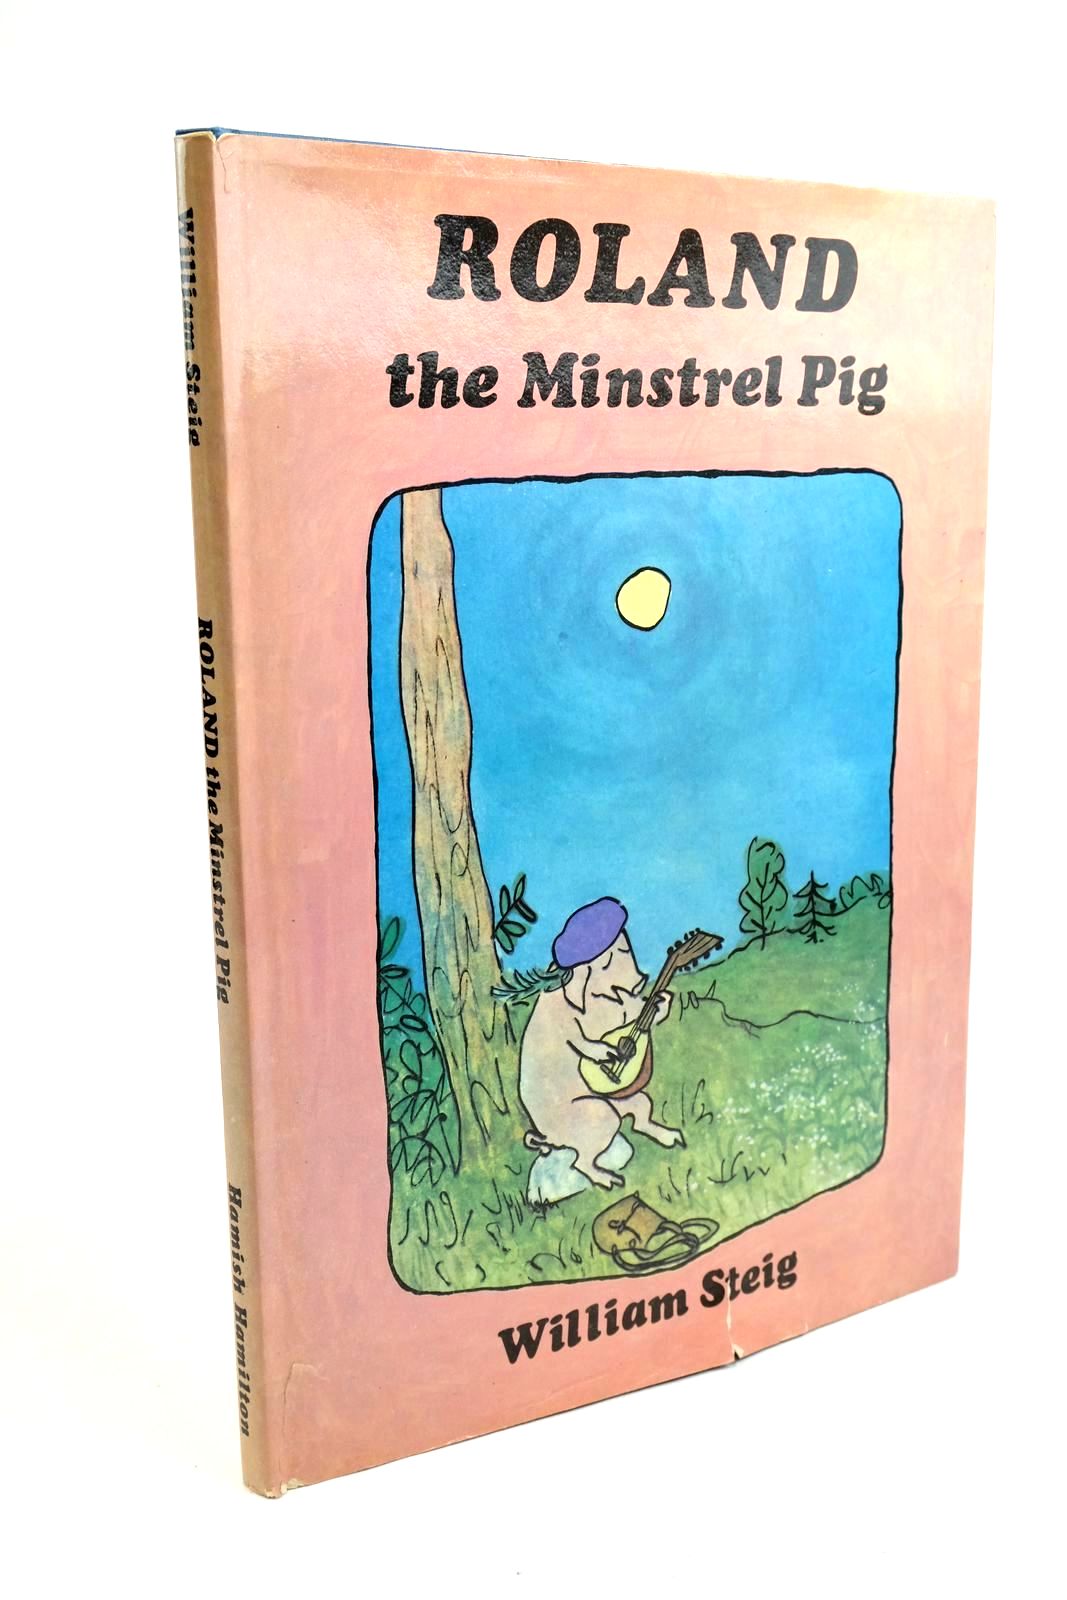 Photo of ROLAND THE MINSTREL PIG written by Steig, William illustrated by Steig, William published by Hamish Hamilton Childrens Books (STOCK CODE: 1321630)  for sale by Stella & Rose's Books